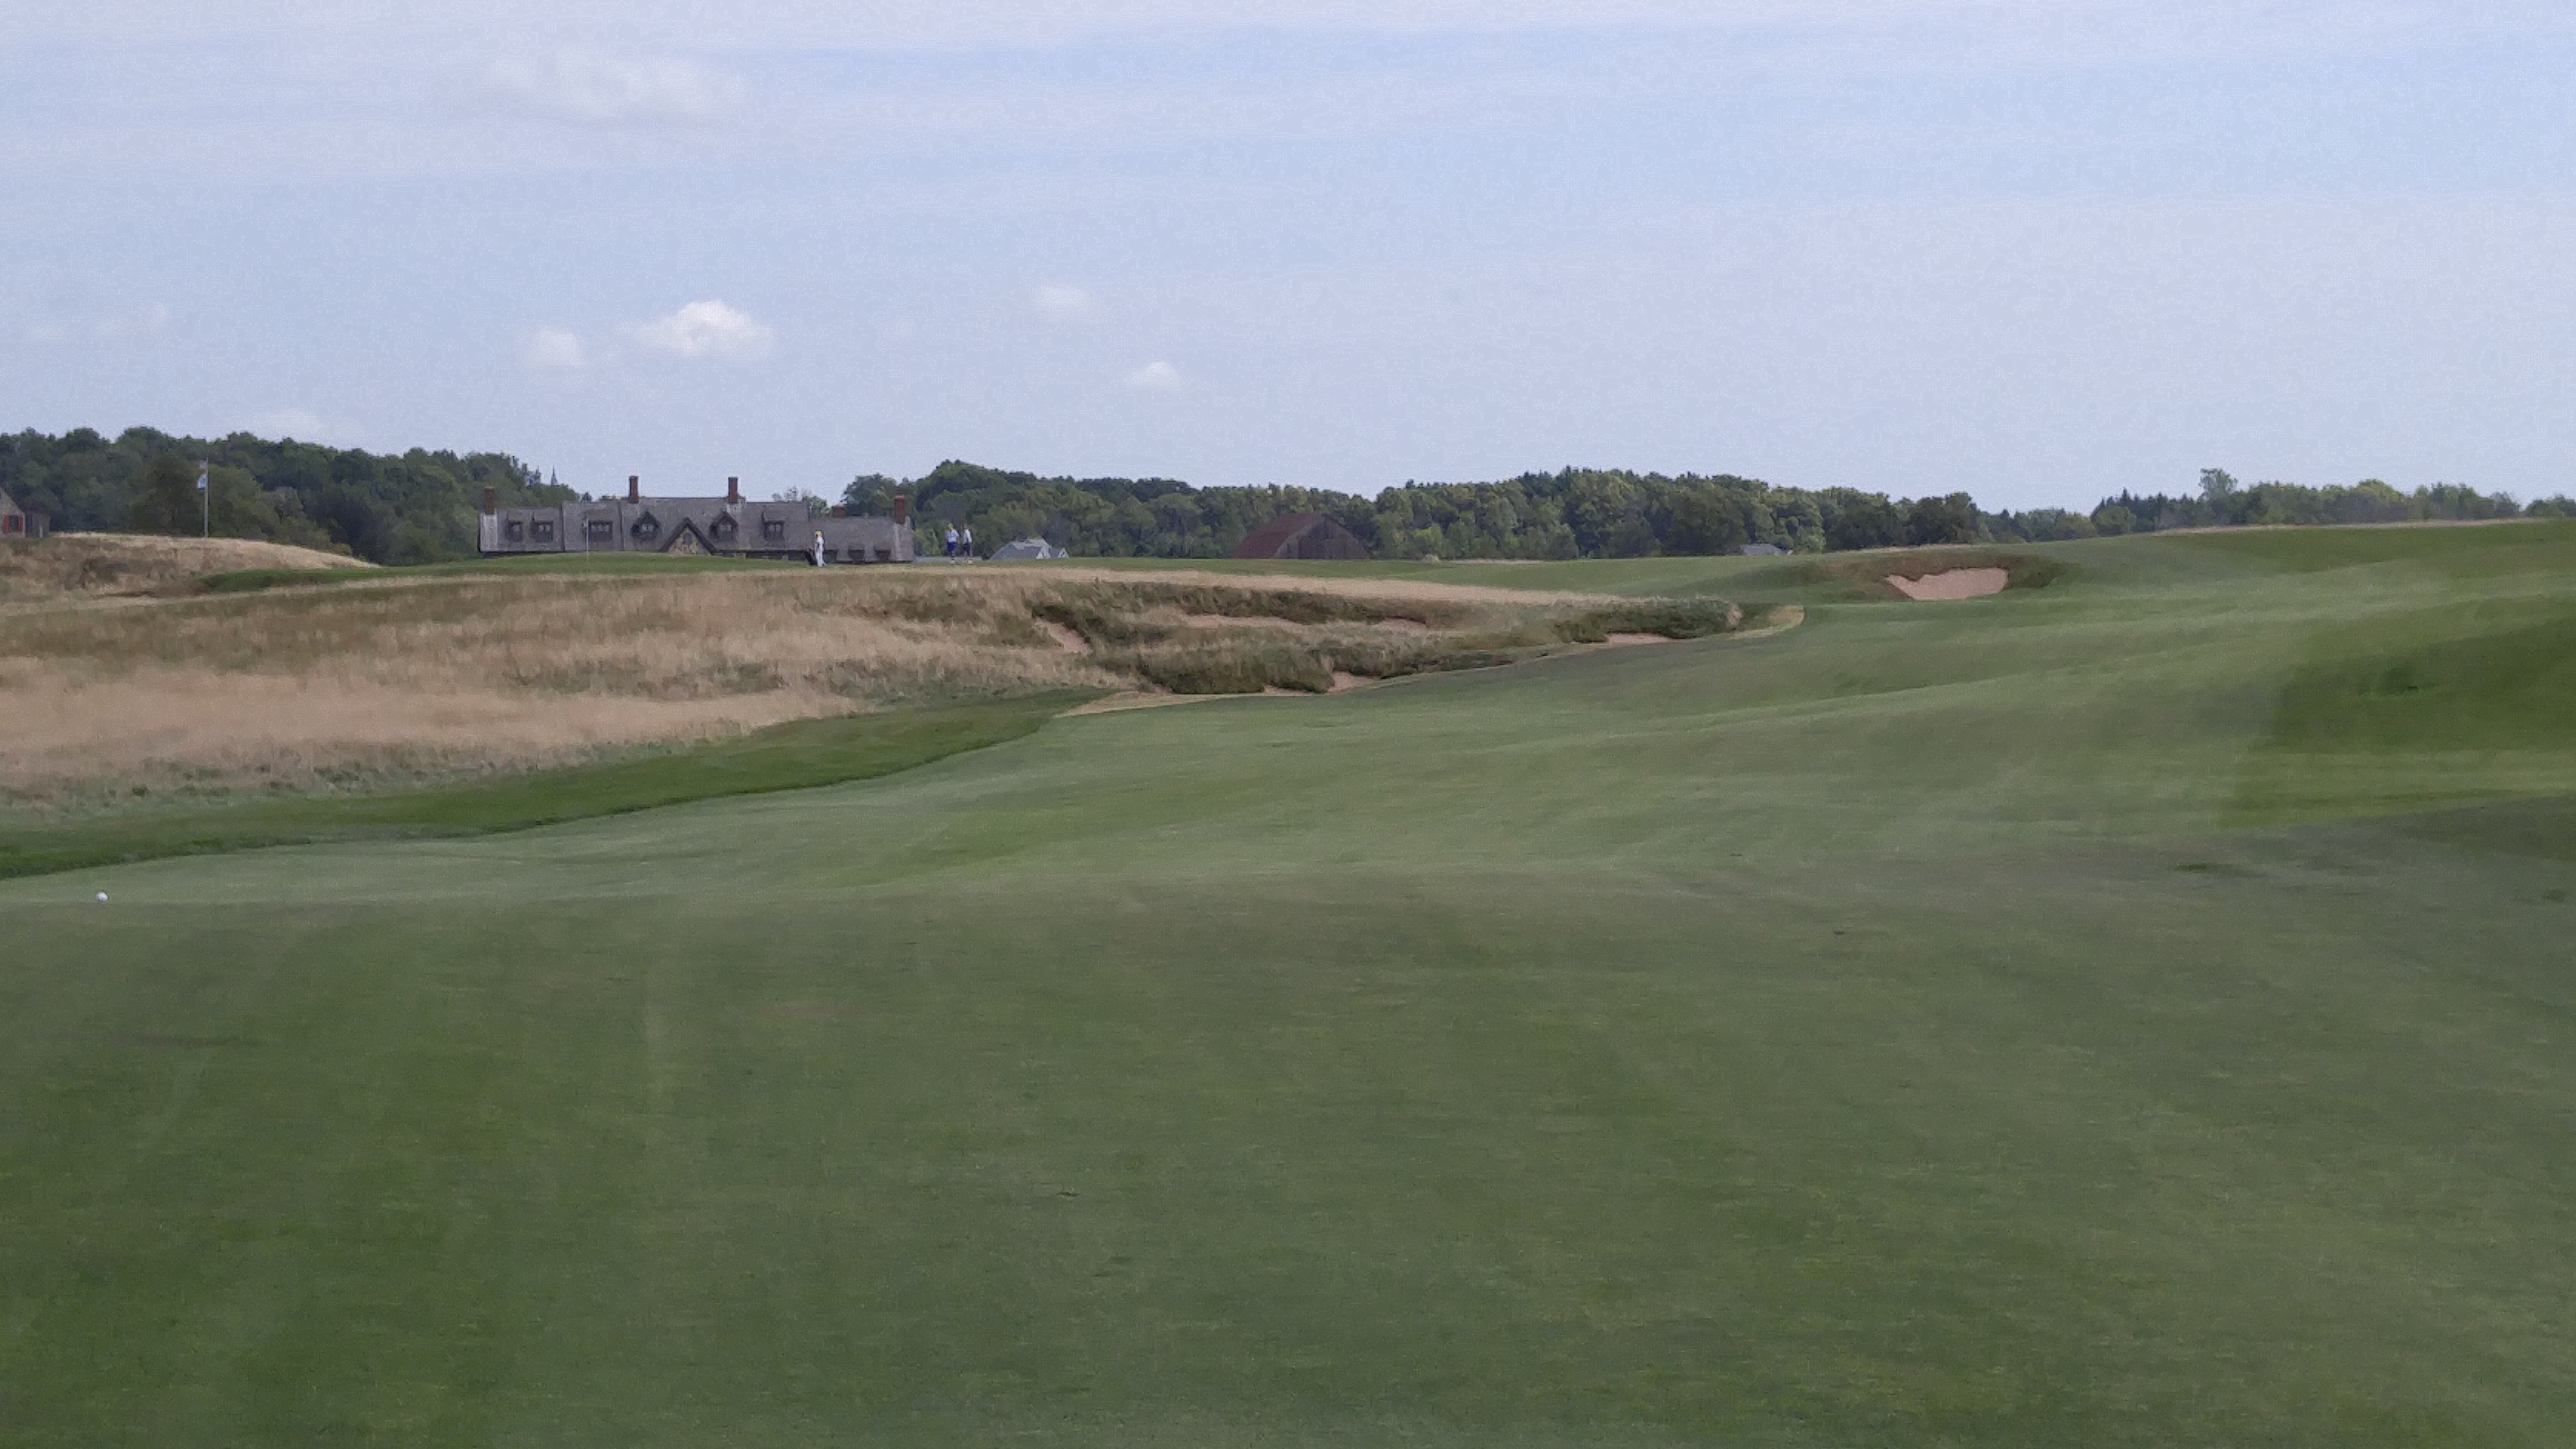 A look at the 18th green at Erin Hills from 300 yards away